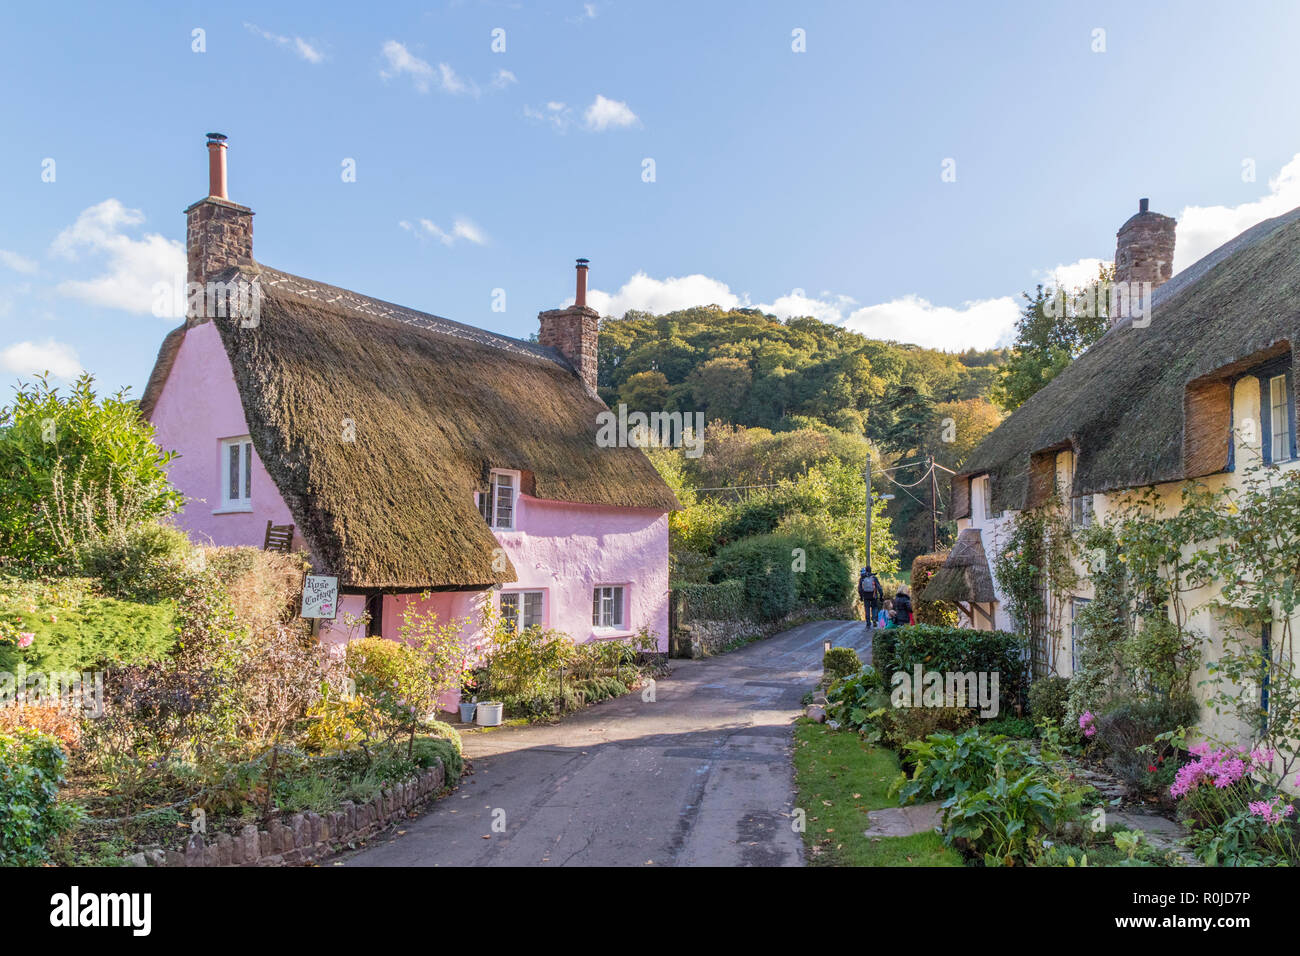 A happy thread of joyous things Thatched-cottages-in-the-attractive-village-of-dunster-exmoor-national-park-somerset-england-uk-R0JD7P